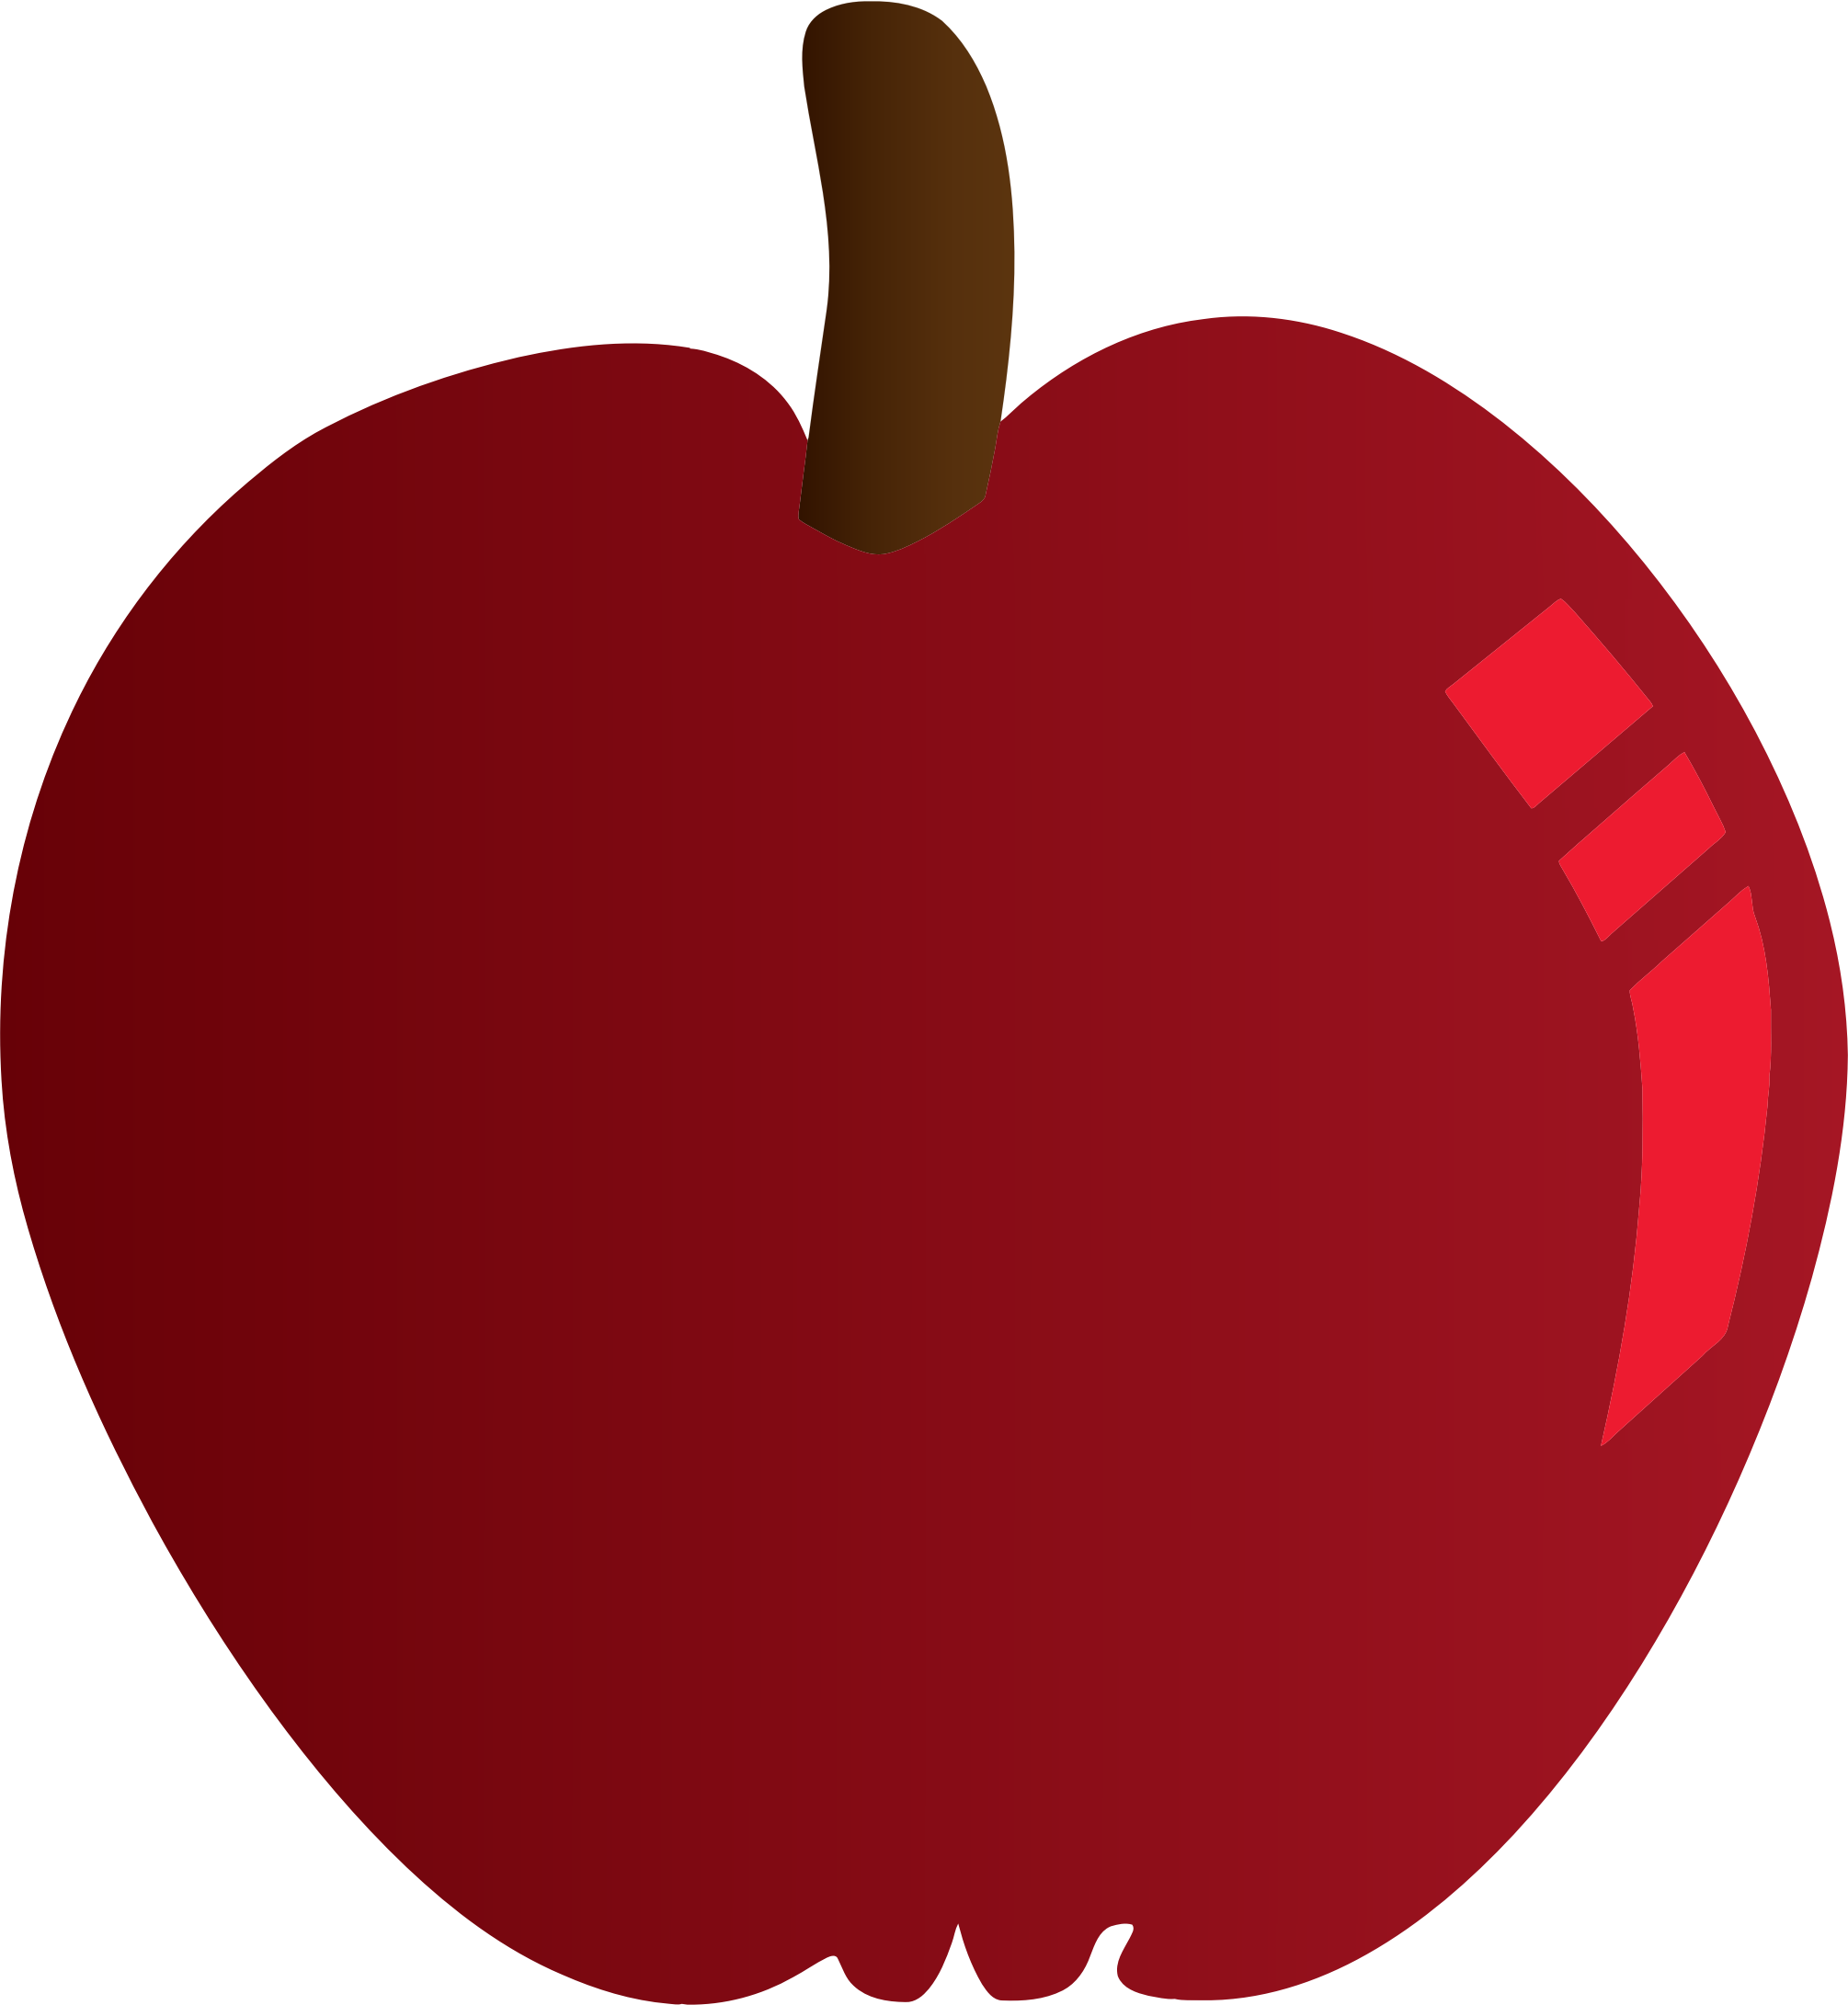 Clipart Apples Polka Dot Picture 376648 Clipart Apples Polka Dot - roblox apples to apples